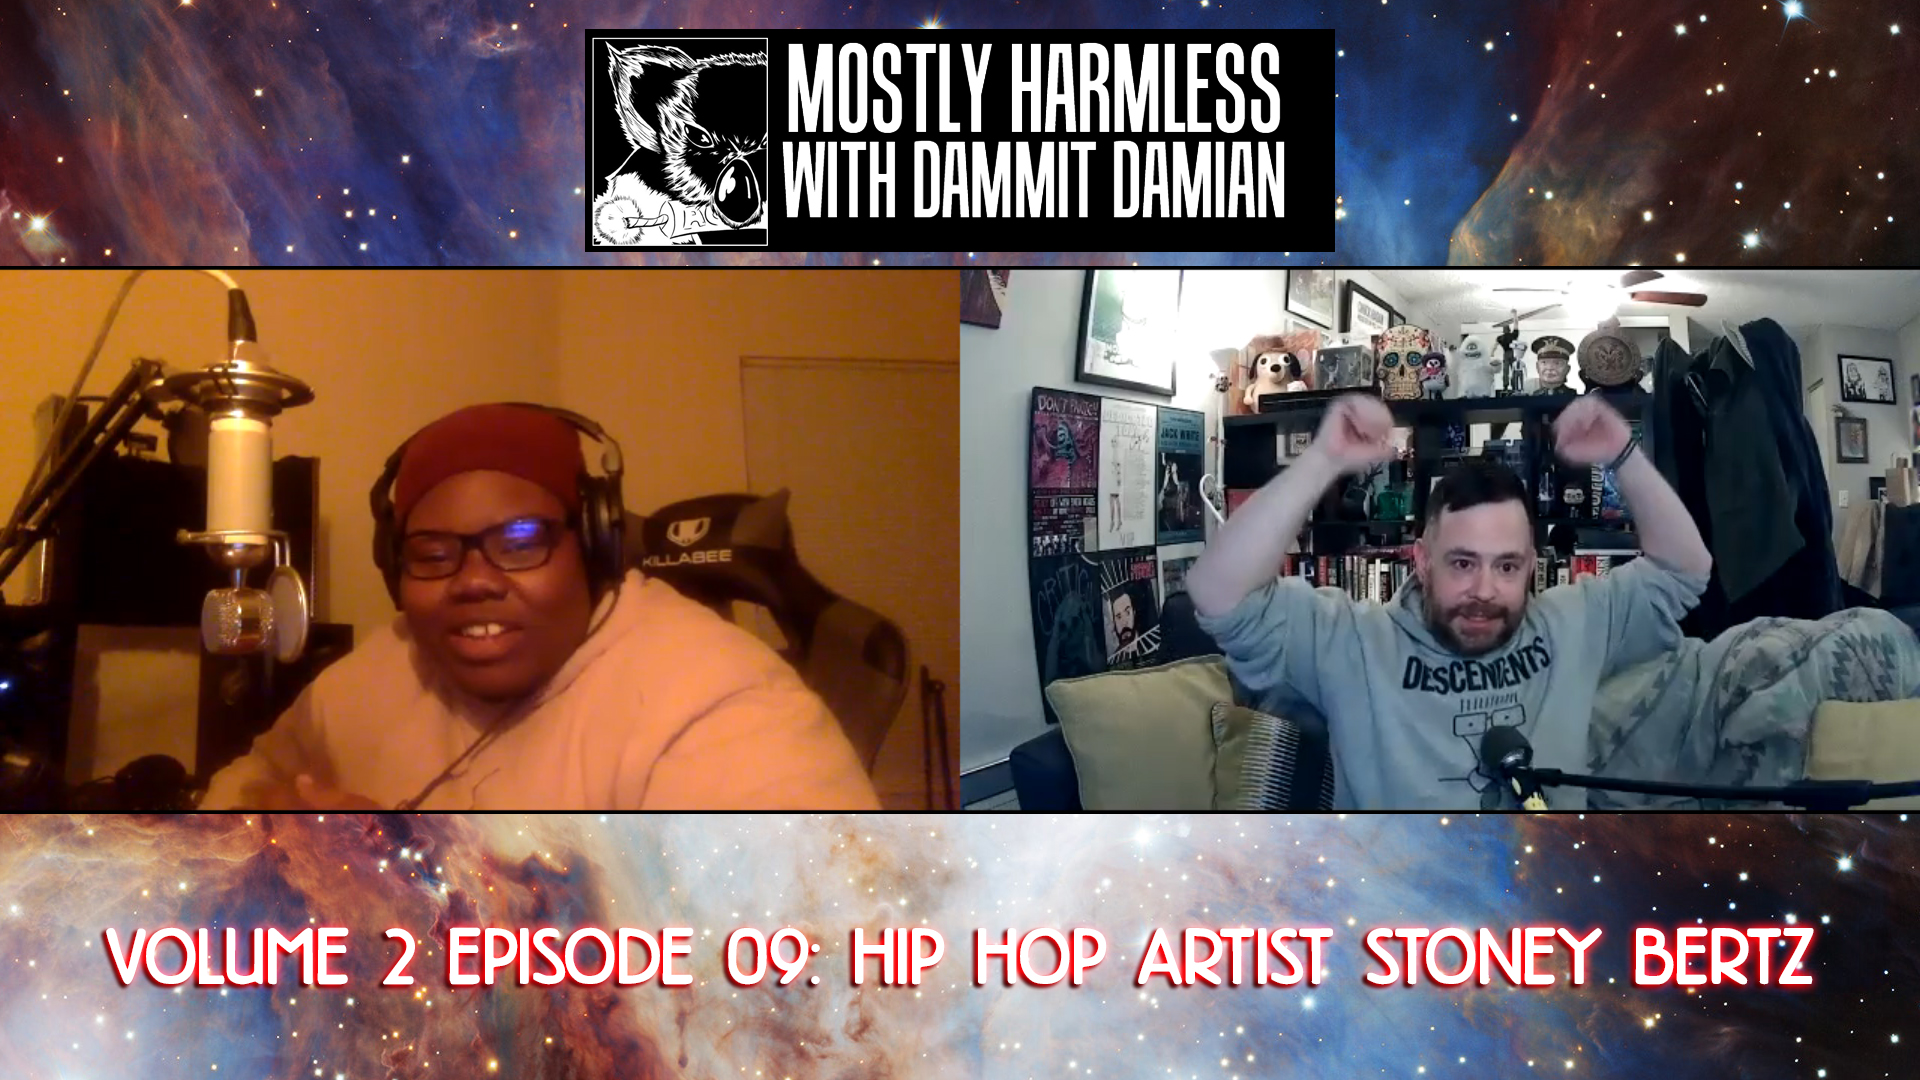 V2 E09 – Hip Hop artist STONEY BERTZ Interview – How finding their voice helped them find their identity